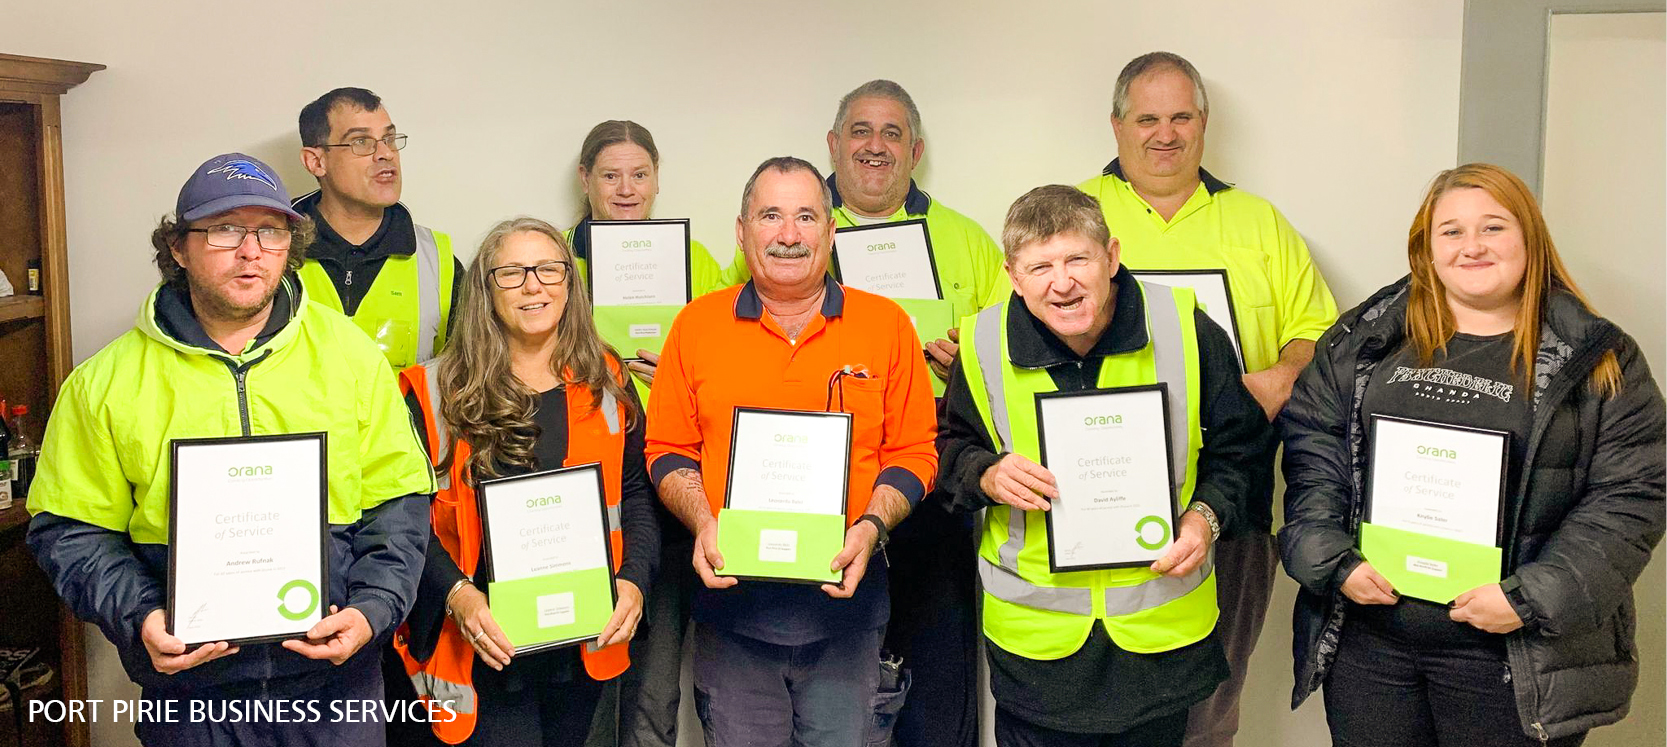 Port Pirie staff and employees celebrating their service awards. 9 people standing and smiling with their certificates. 